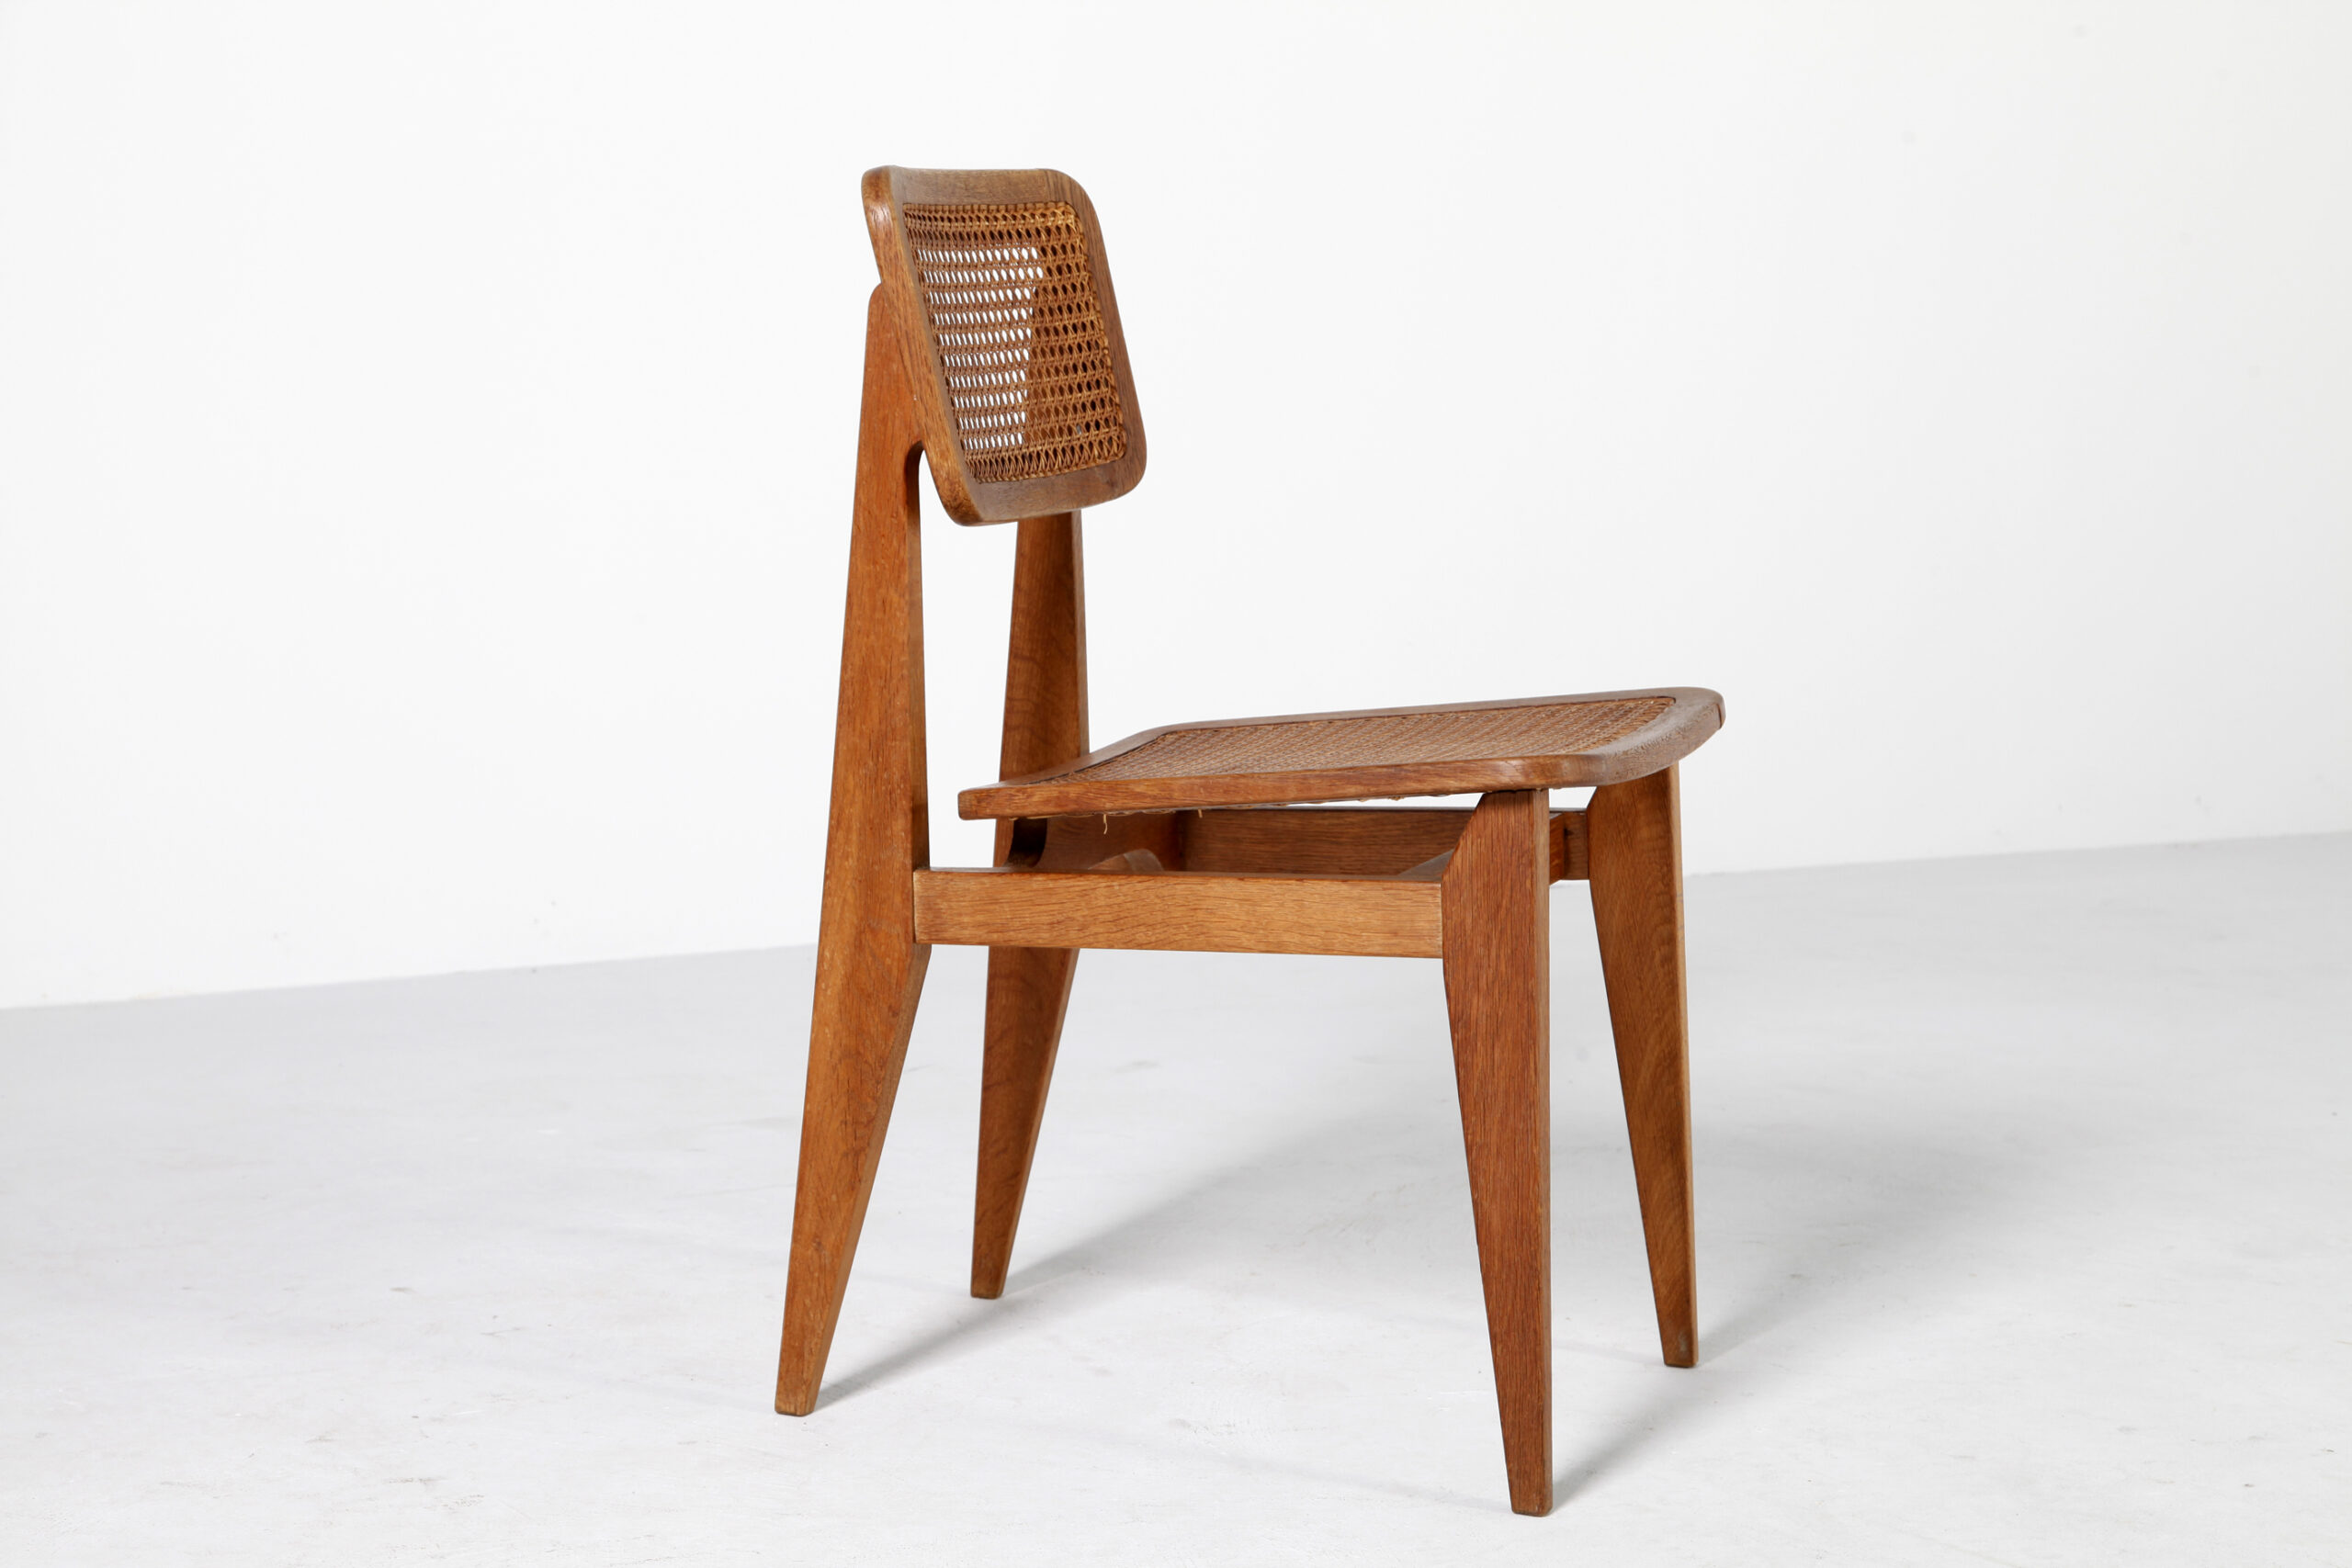 C cane chair by Marcel Gascoin | Swanky Systems